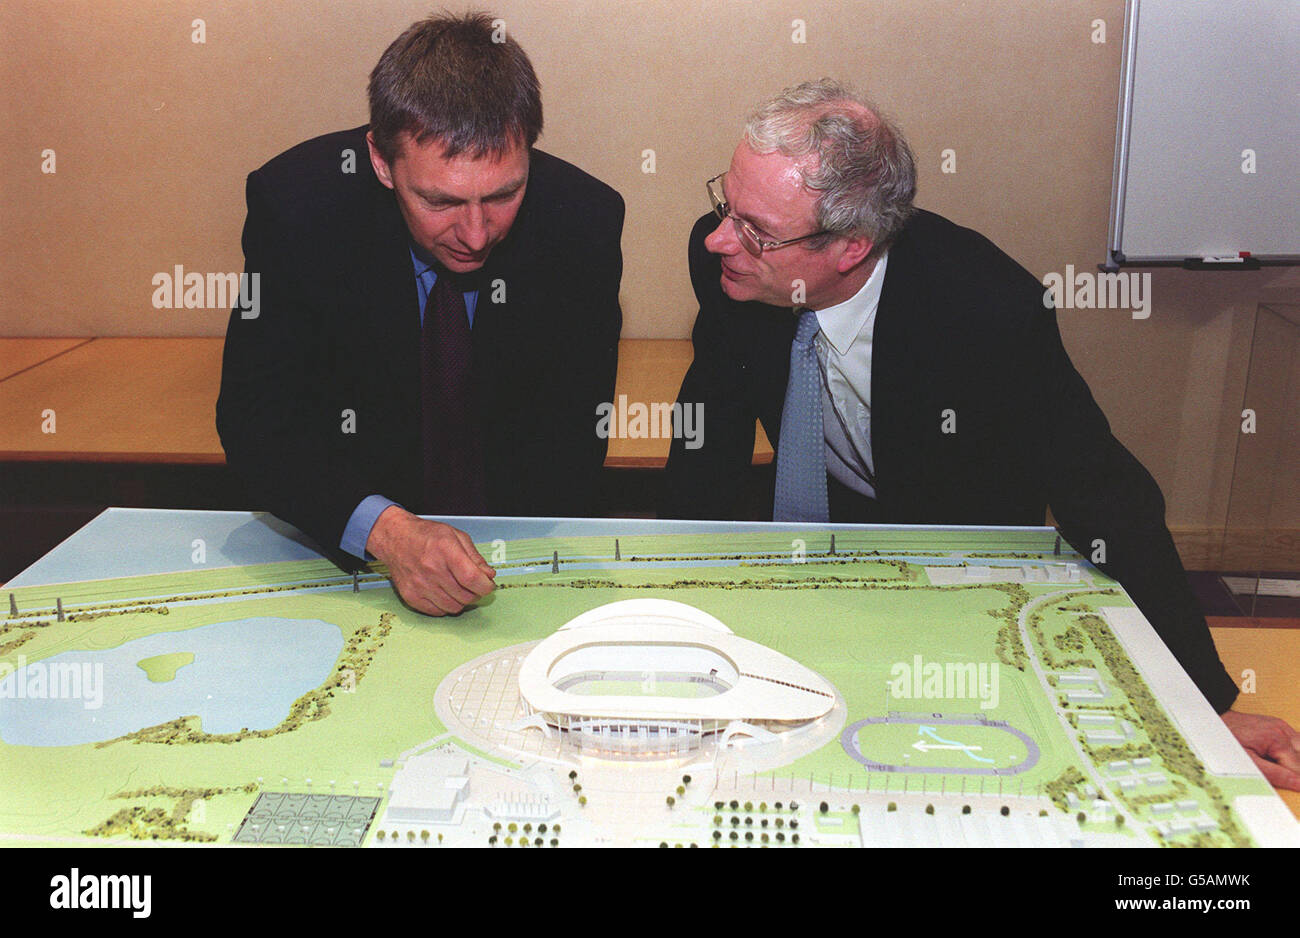 Secretary of State for Culture, Media and Sport, Chris Smith MP (right), and UK Athletics Chief Executive, David Moorcroft, look at a scale model of the Lee Valley National Athletics Centre in Picketts Lock, north London. * Further details of the centre, which will host the 2005 World Athletics Championships, were unveiled at a press conference in London today. The complex will cost around 87million and seat 43,000 spectators. Stock Photo